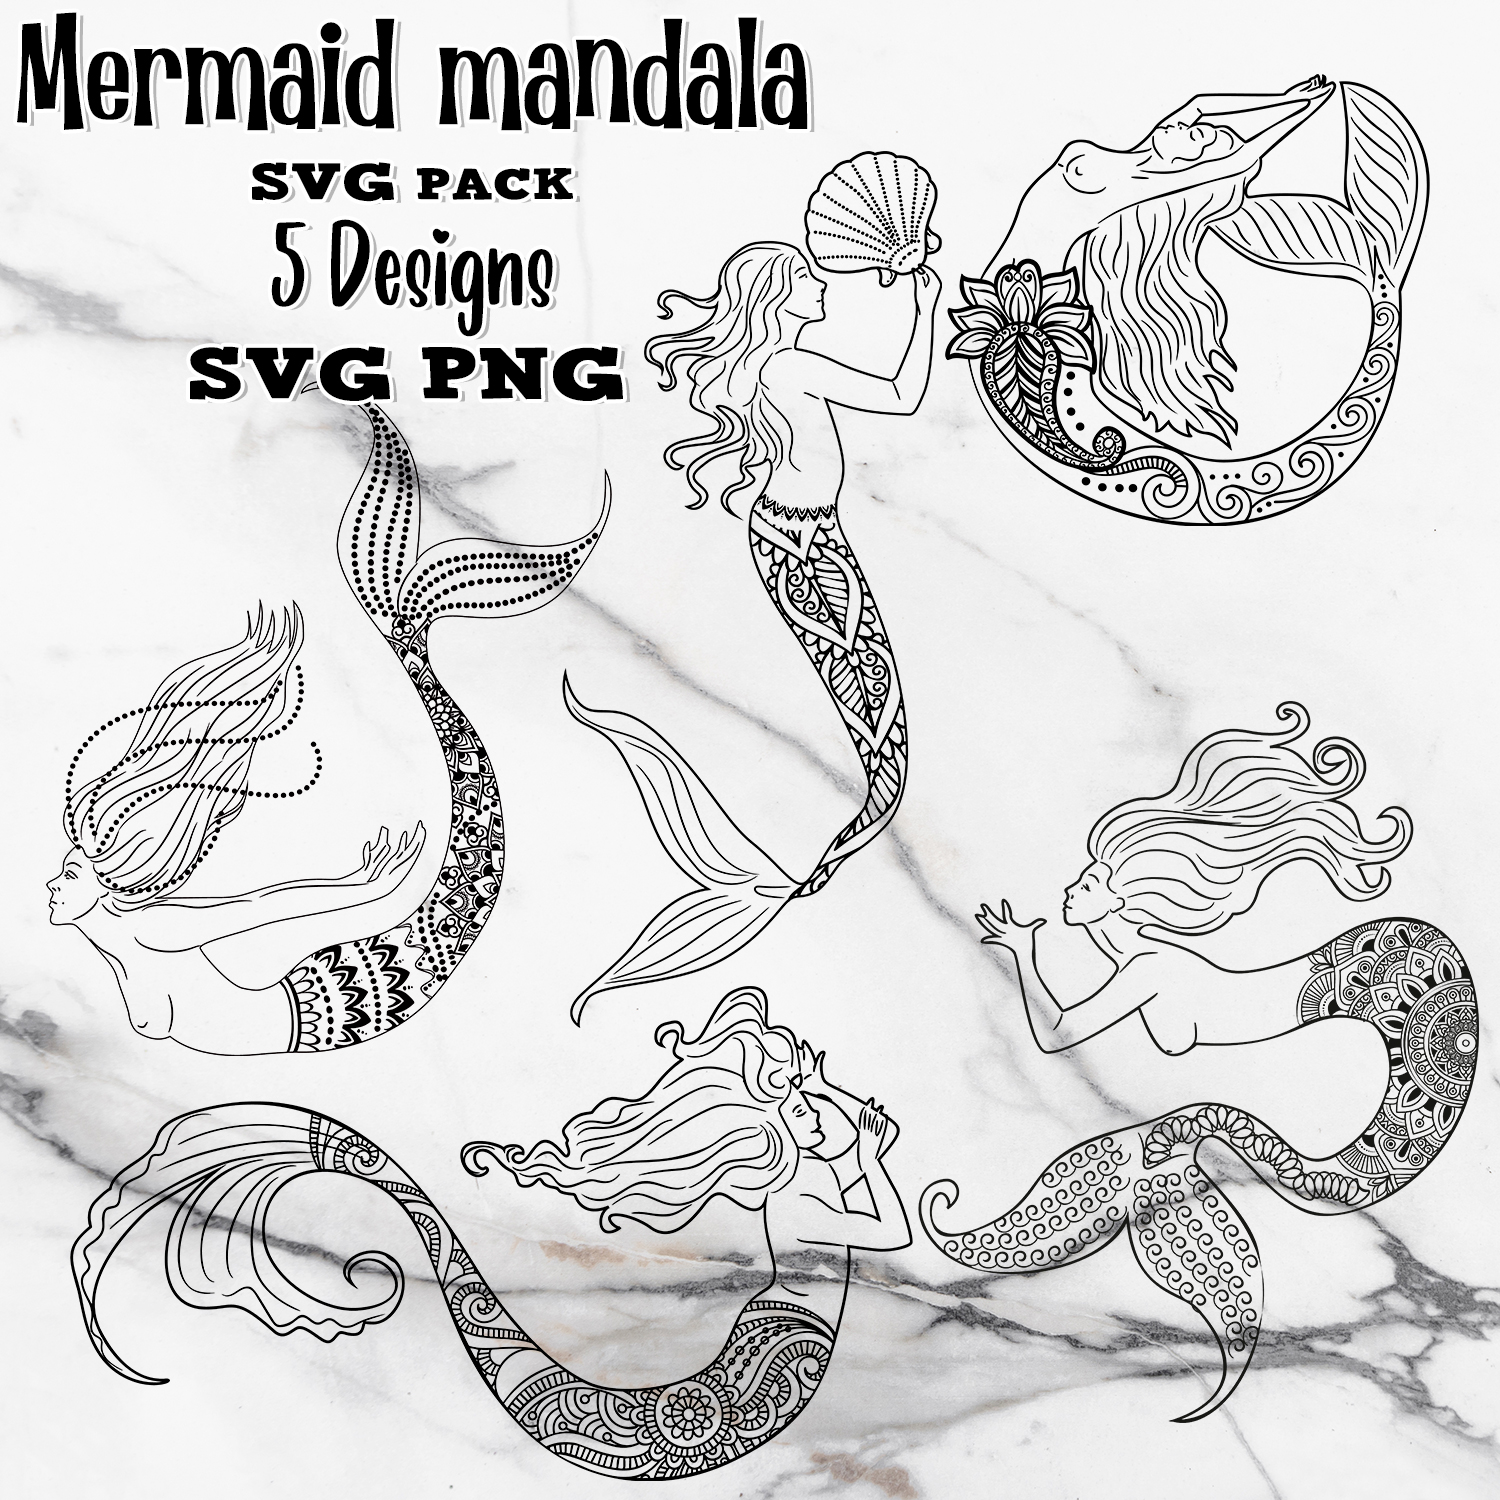 Preview of images of mermaids.